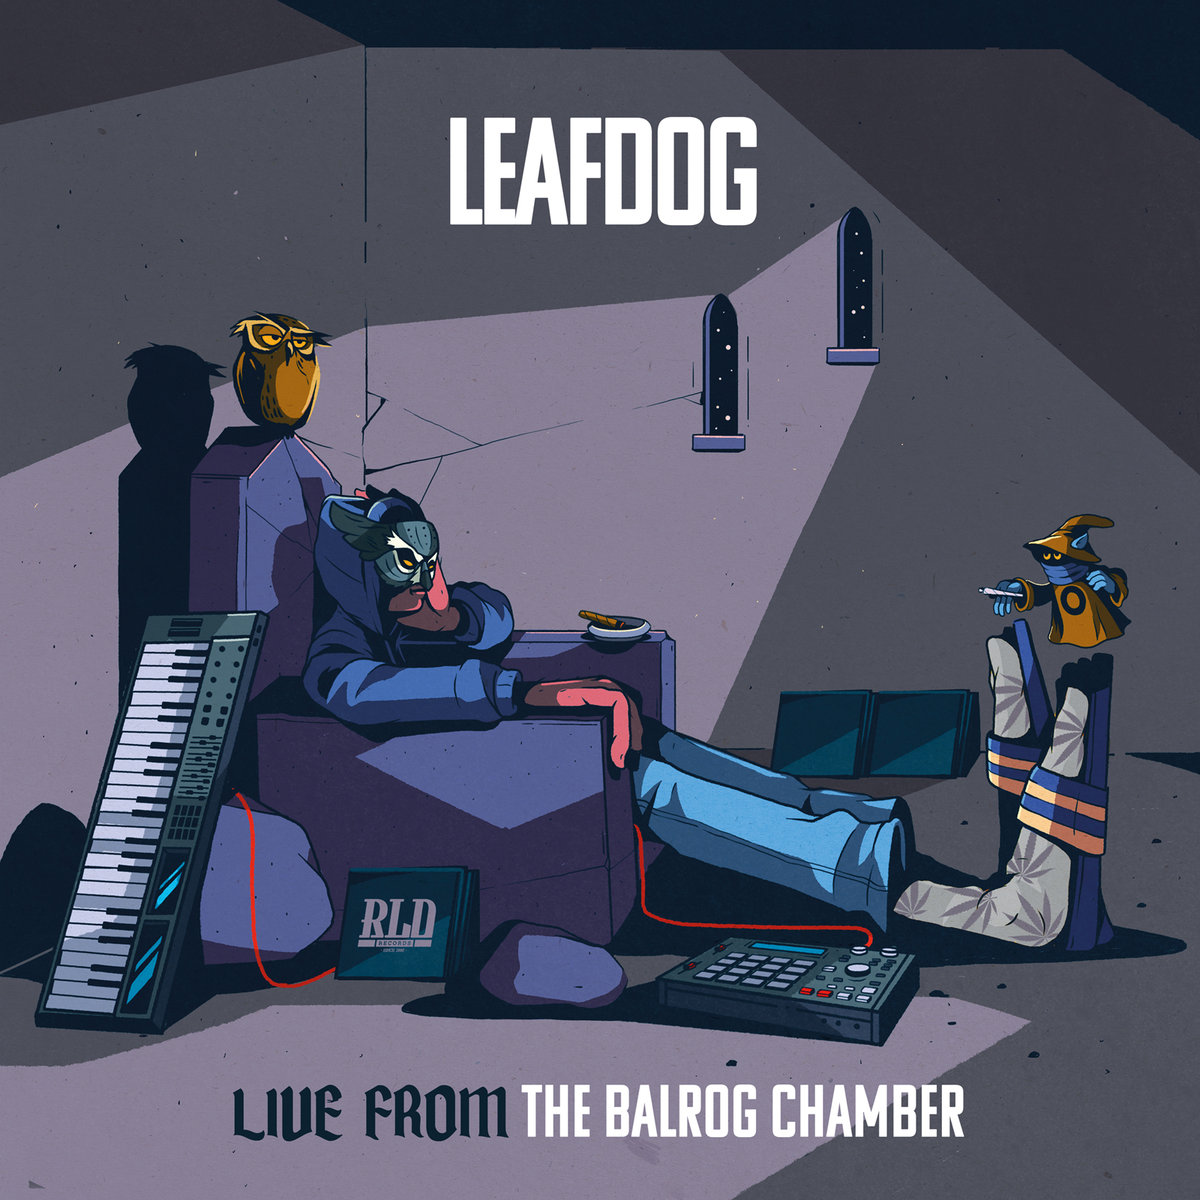 Live_from_the_balrog_chamber_leaf_dog